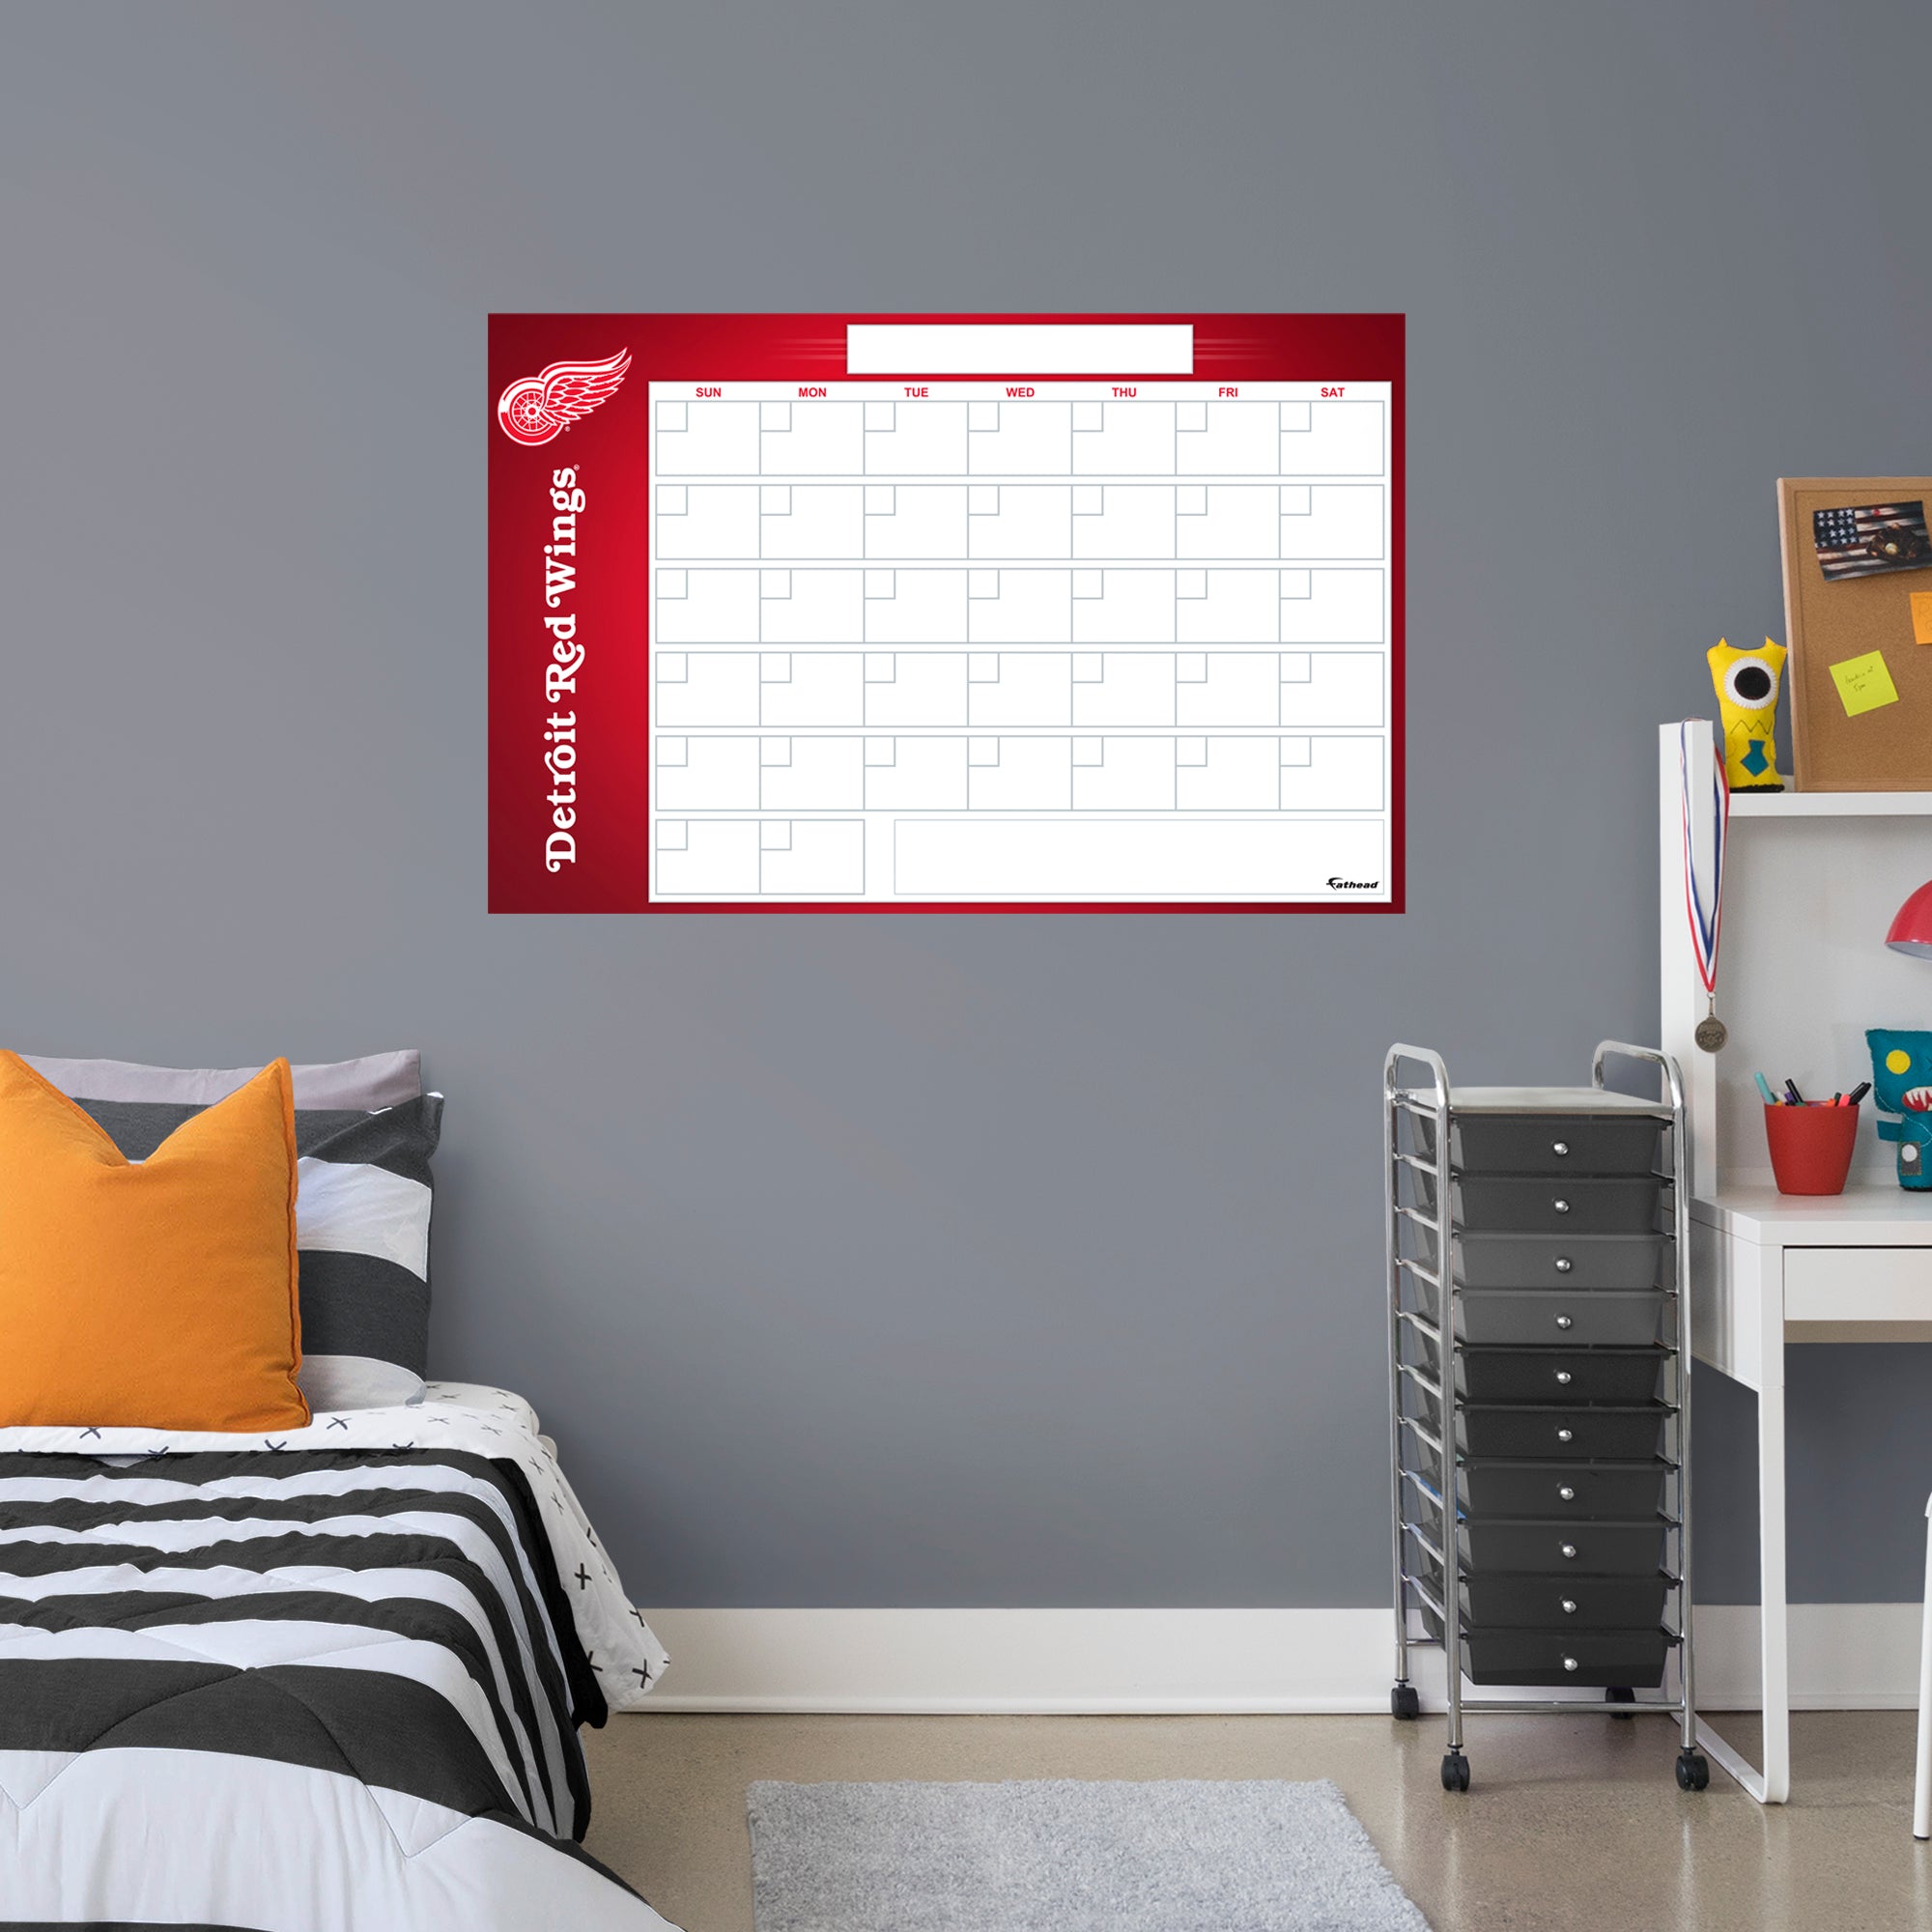 Detroit Red Wings Dry Erase Calendar - Officially Licensed NHL Removable Wall Decal Giant Decal (57"W x 34"H) by Fathead | Vinyl